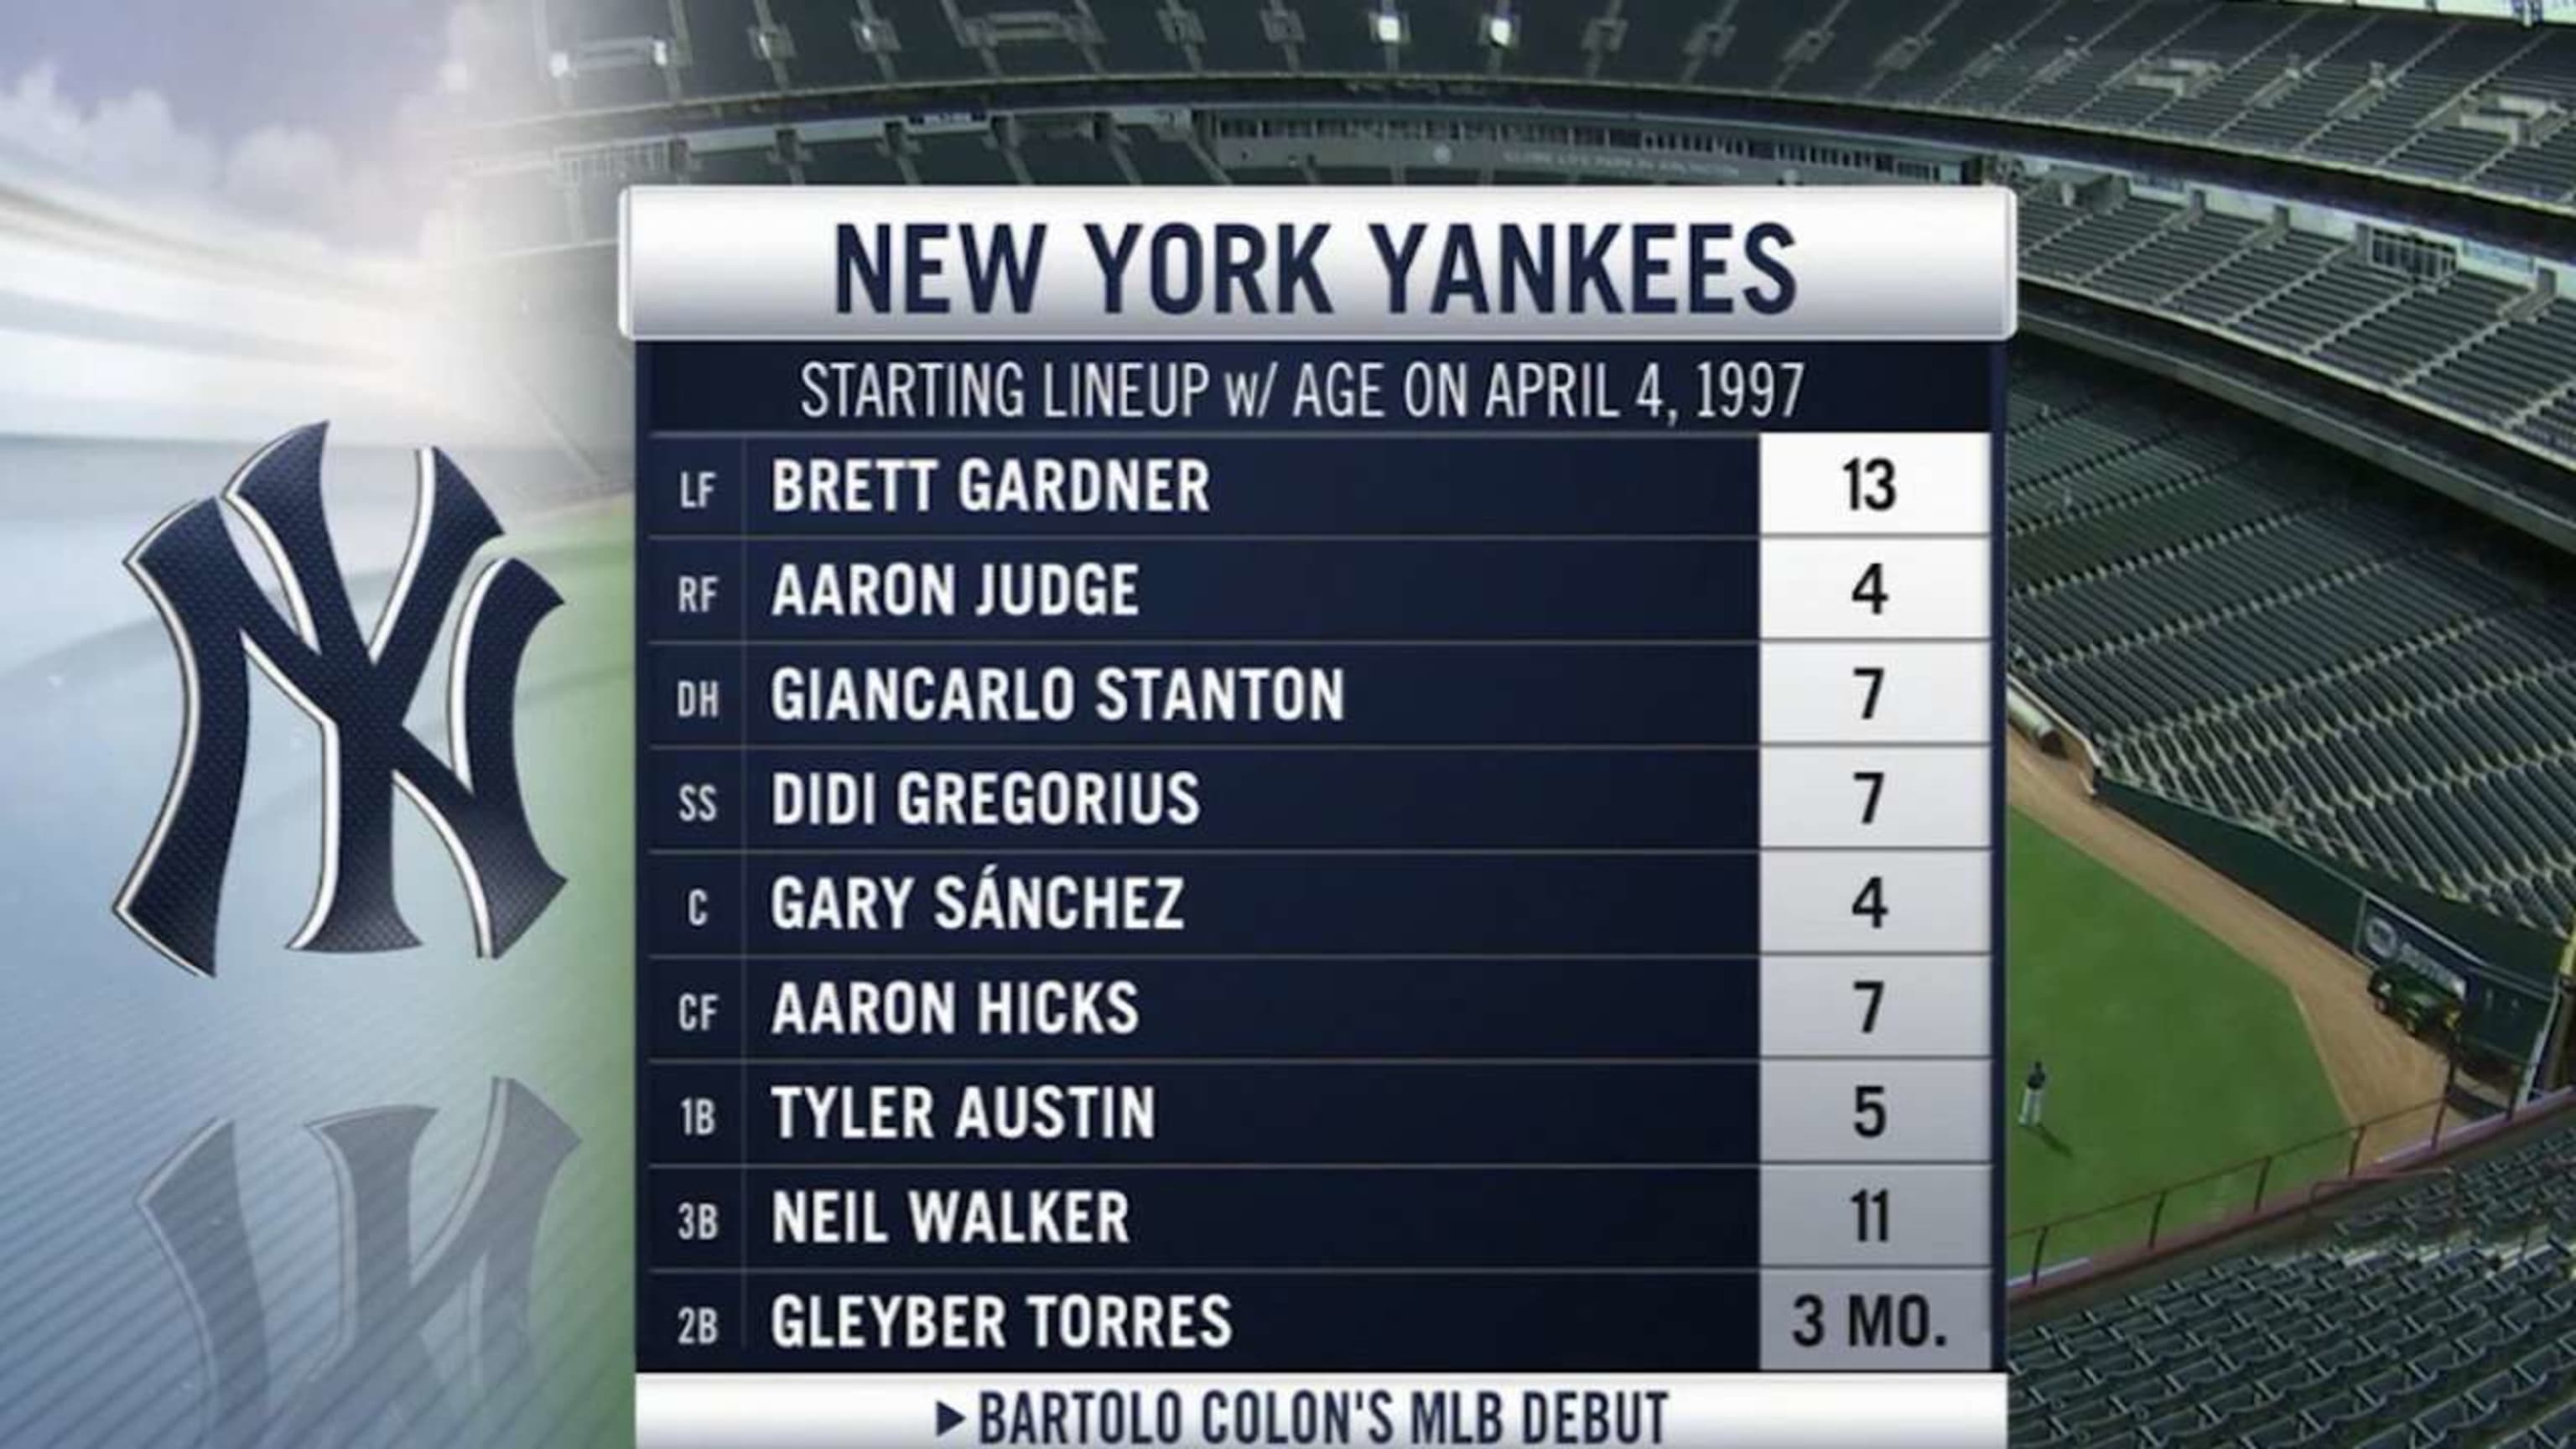 Gleyber Torres was 3 months old when Bartolo Colon made his debut